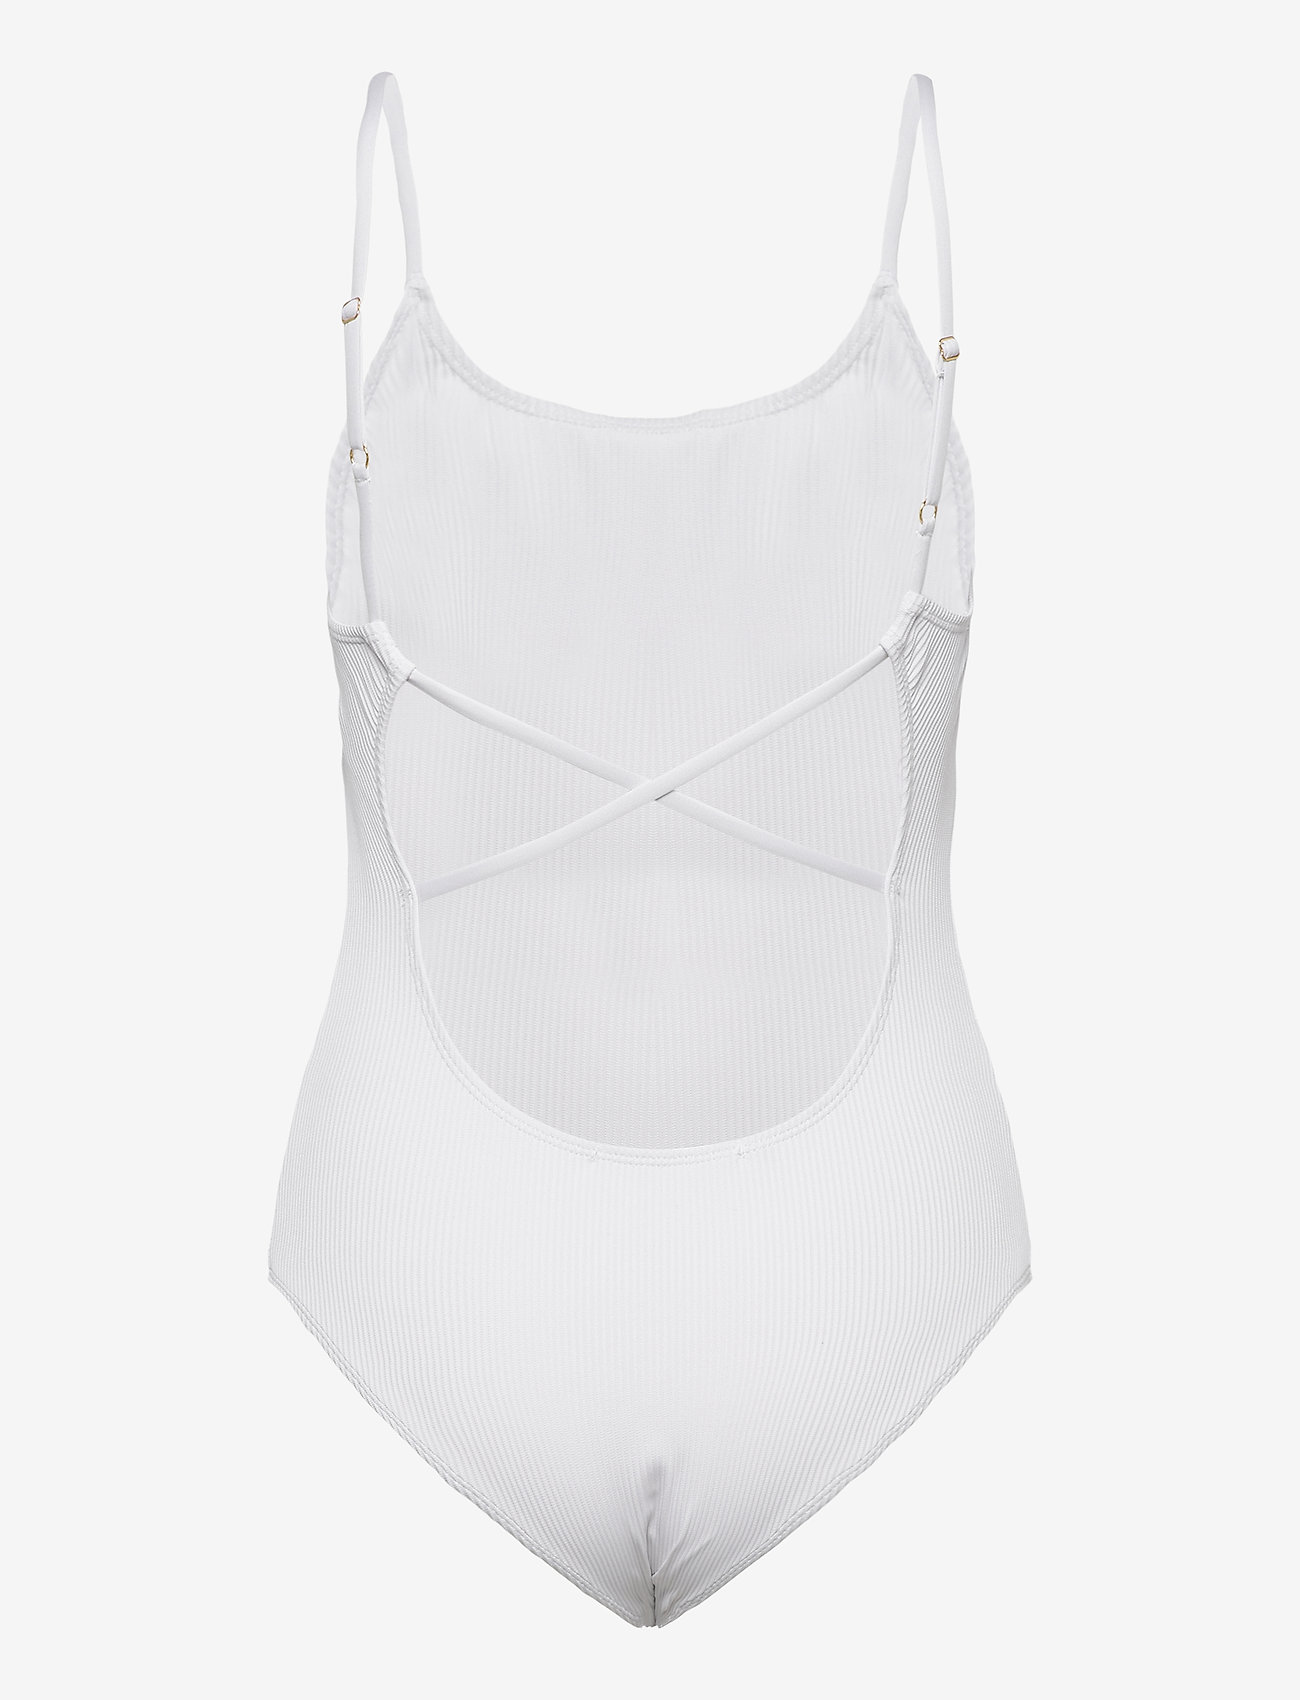 Underprotection - Adrianna swimsuit - swimsuits - white - 1